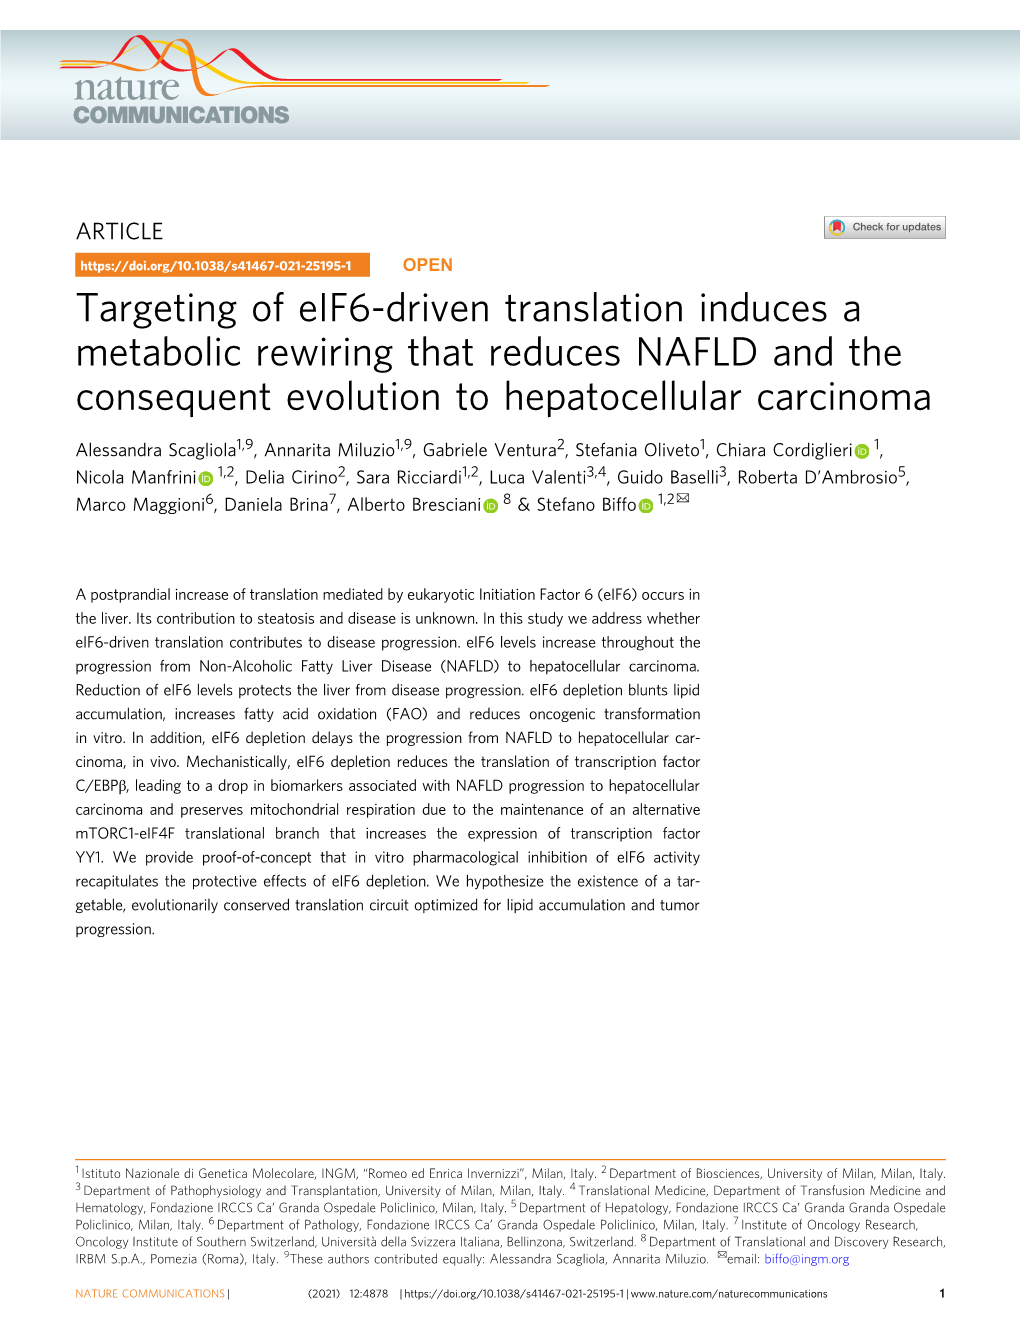 Targeting of Eif6-Driven Translation Induces a Metabolic Rewiring That Reduces NAFLD and the Consequent Evolution to Hepatocellular Carcinoma